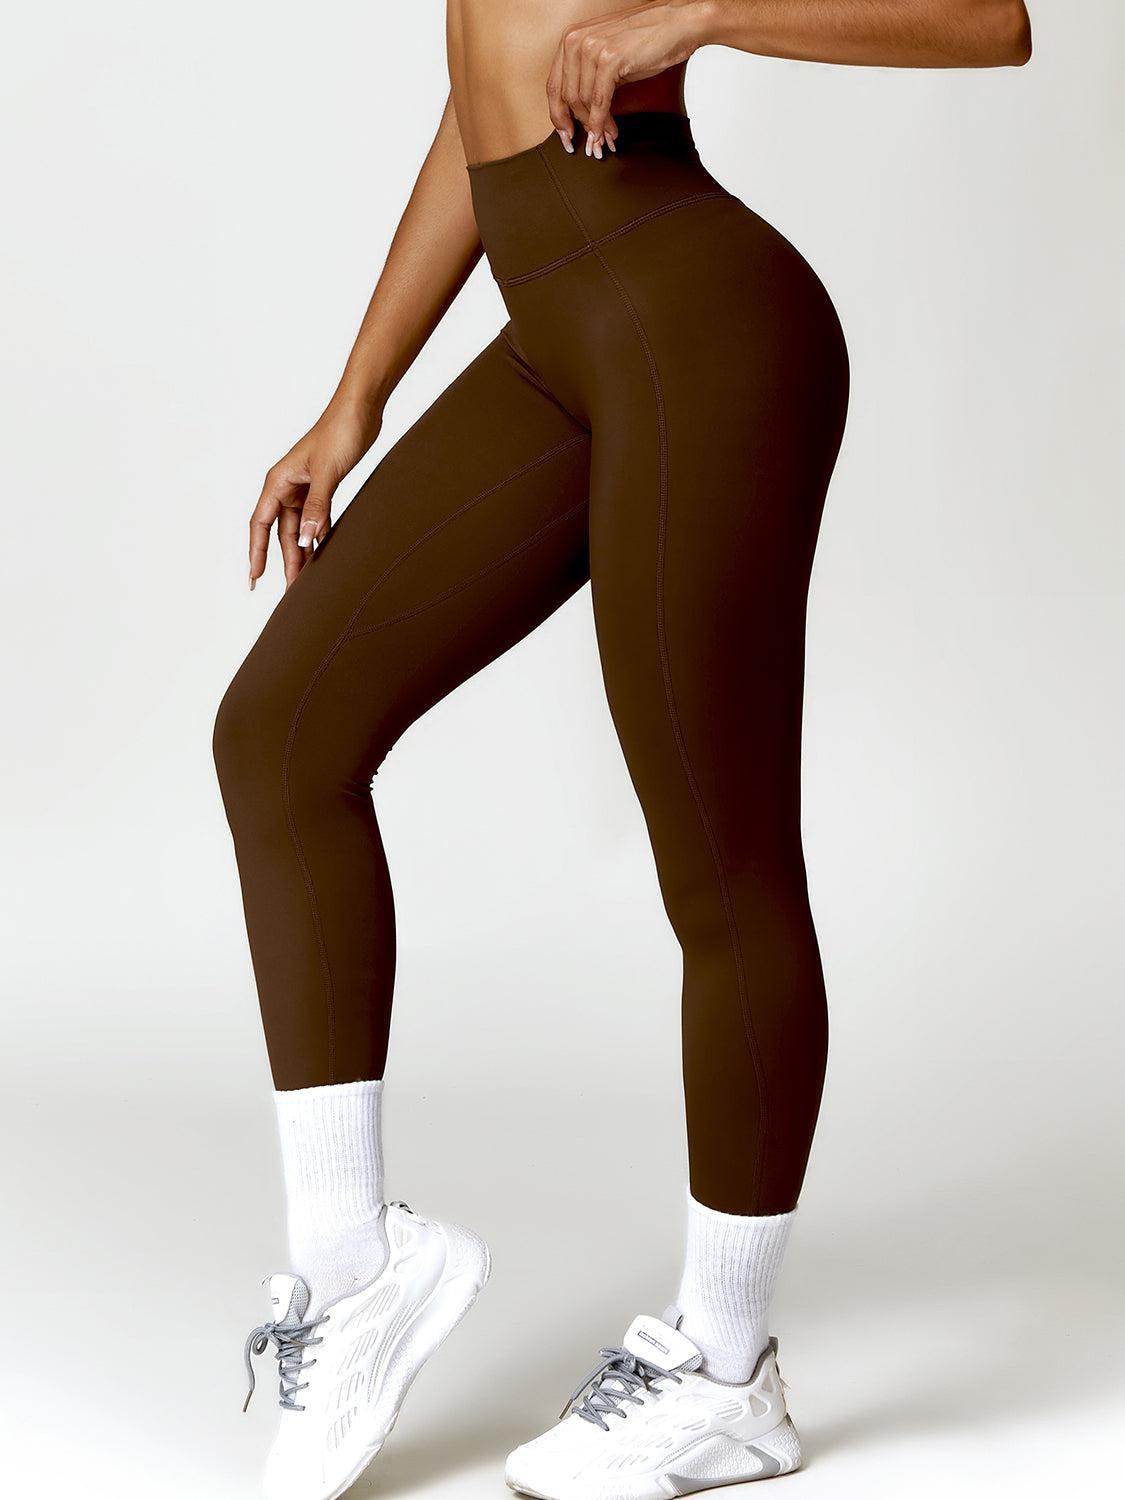 a woman in a brown sports bra top and leggings